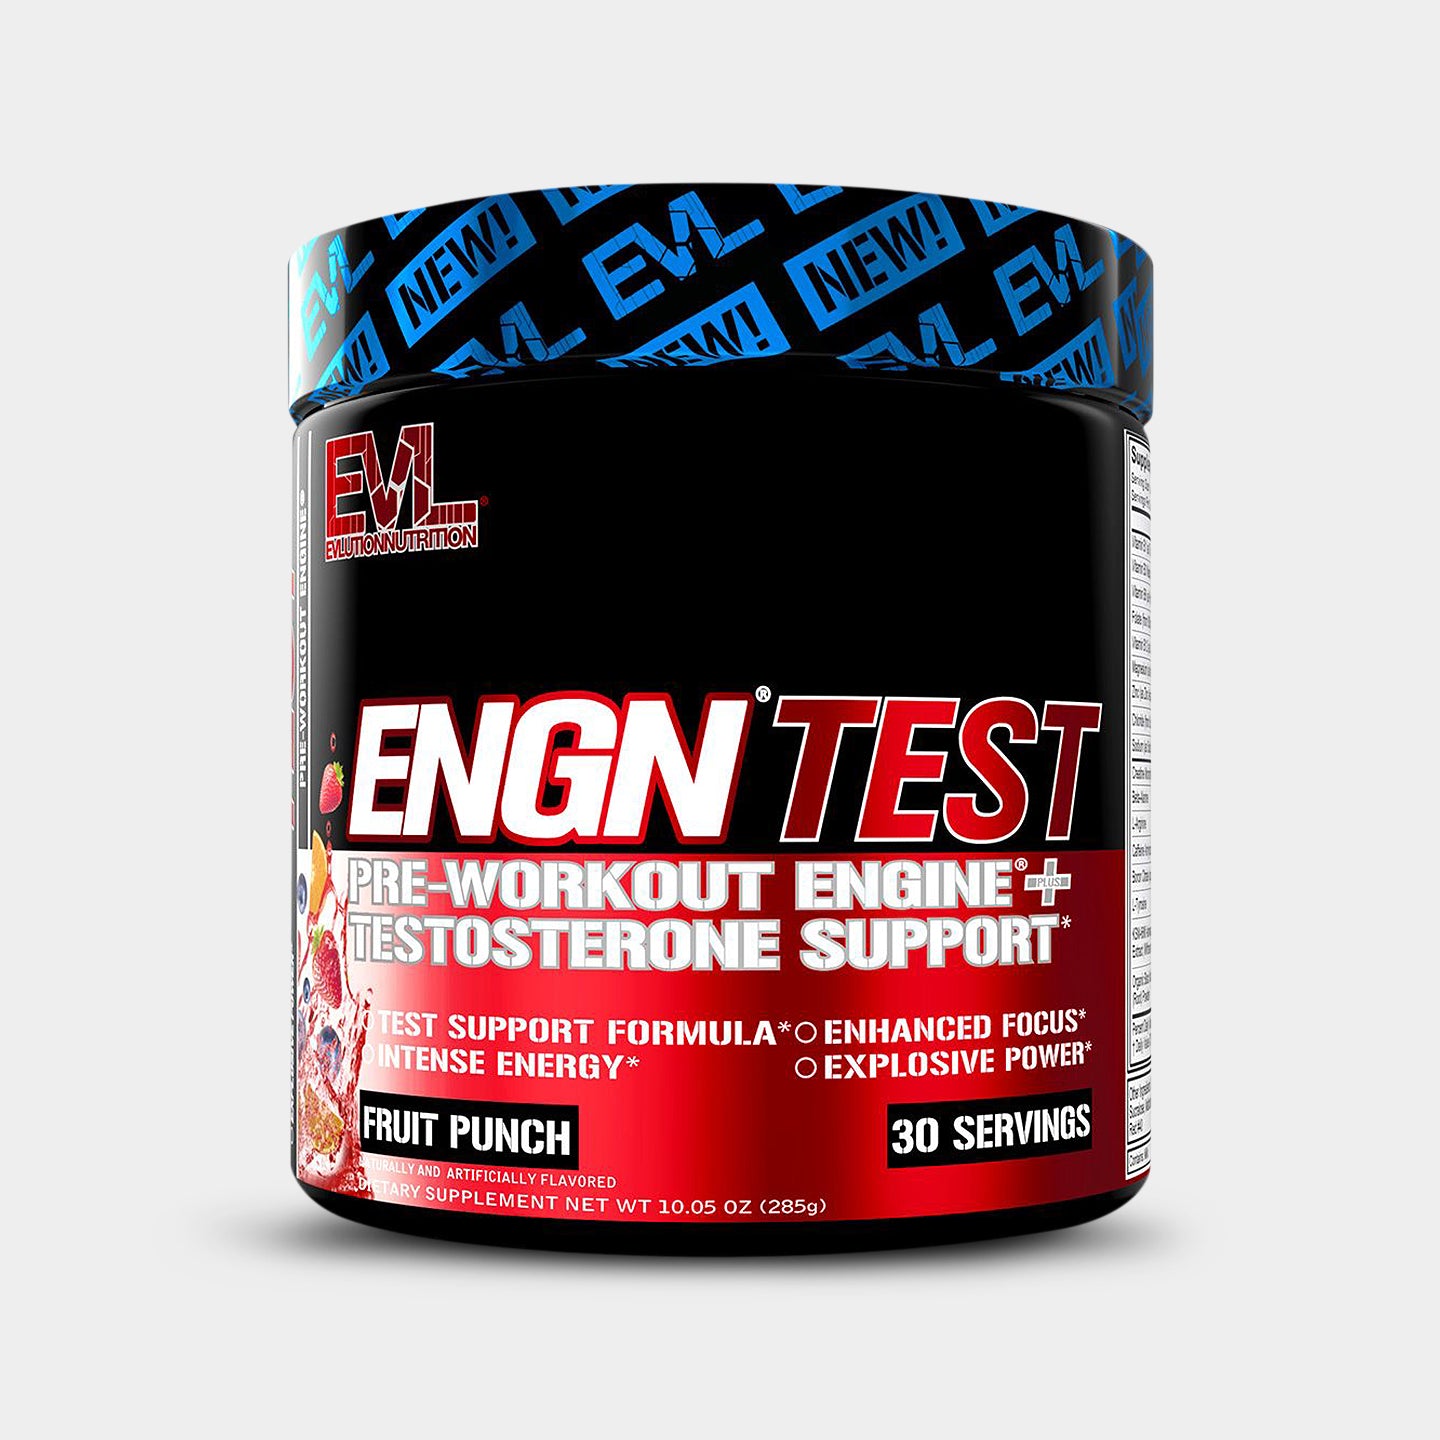 EVLUTION NUTRITION ENGN Test Pre-Workout Testosterone Support A1